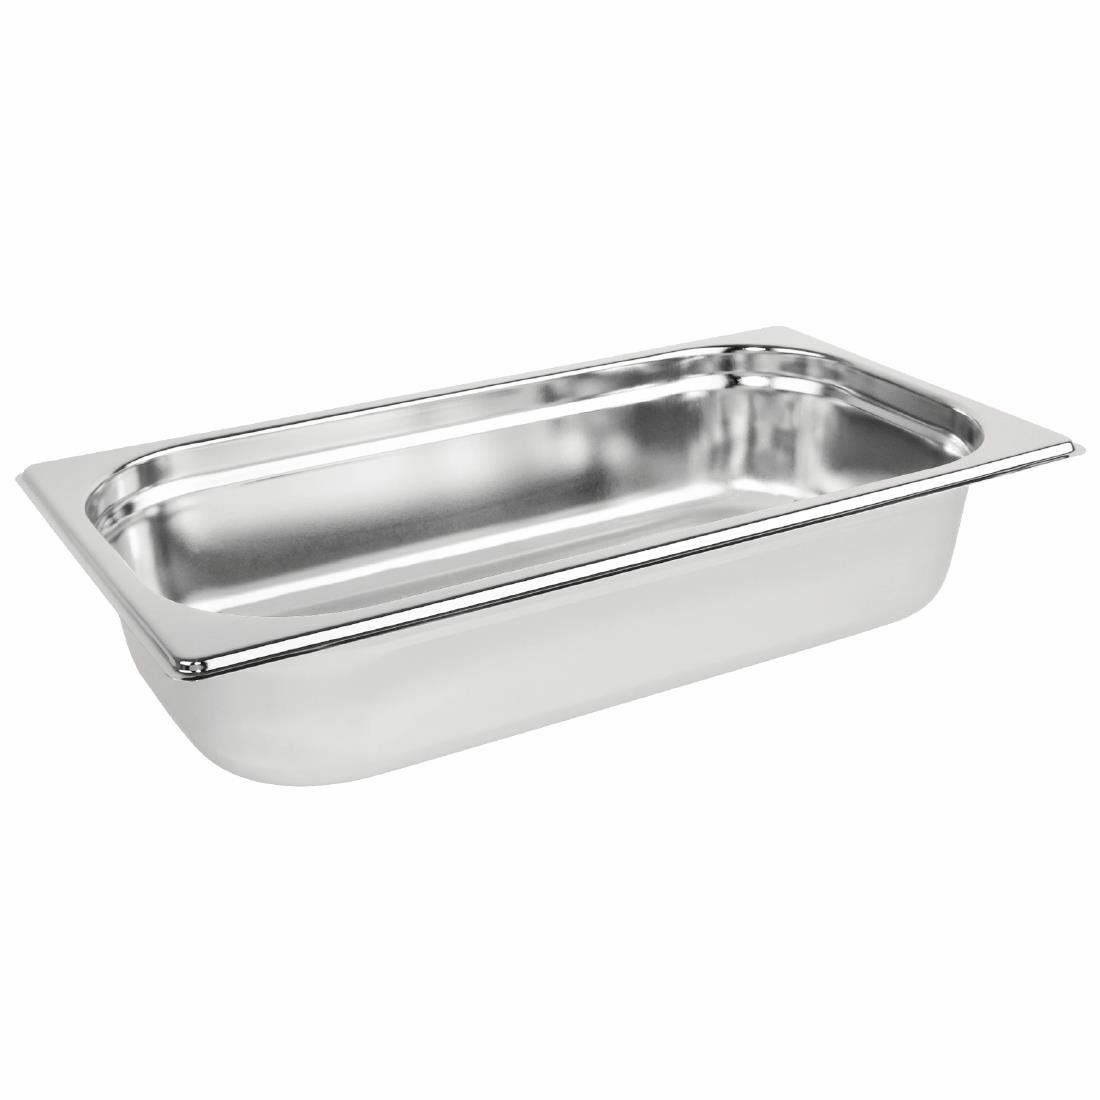 Indianapolis Mall Vogue Stainless Steel 1 3 Gastronorm Overhanging OFFicial shop Rim with 65 Pan